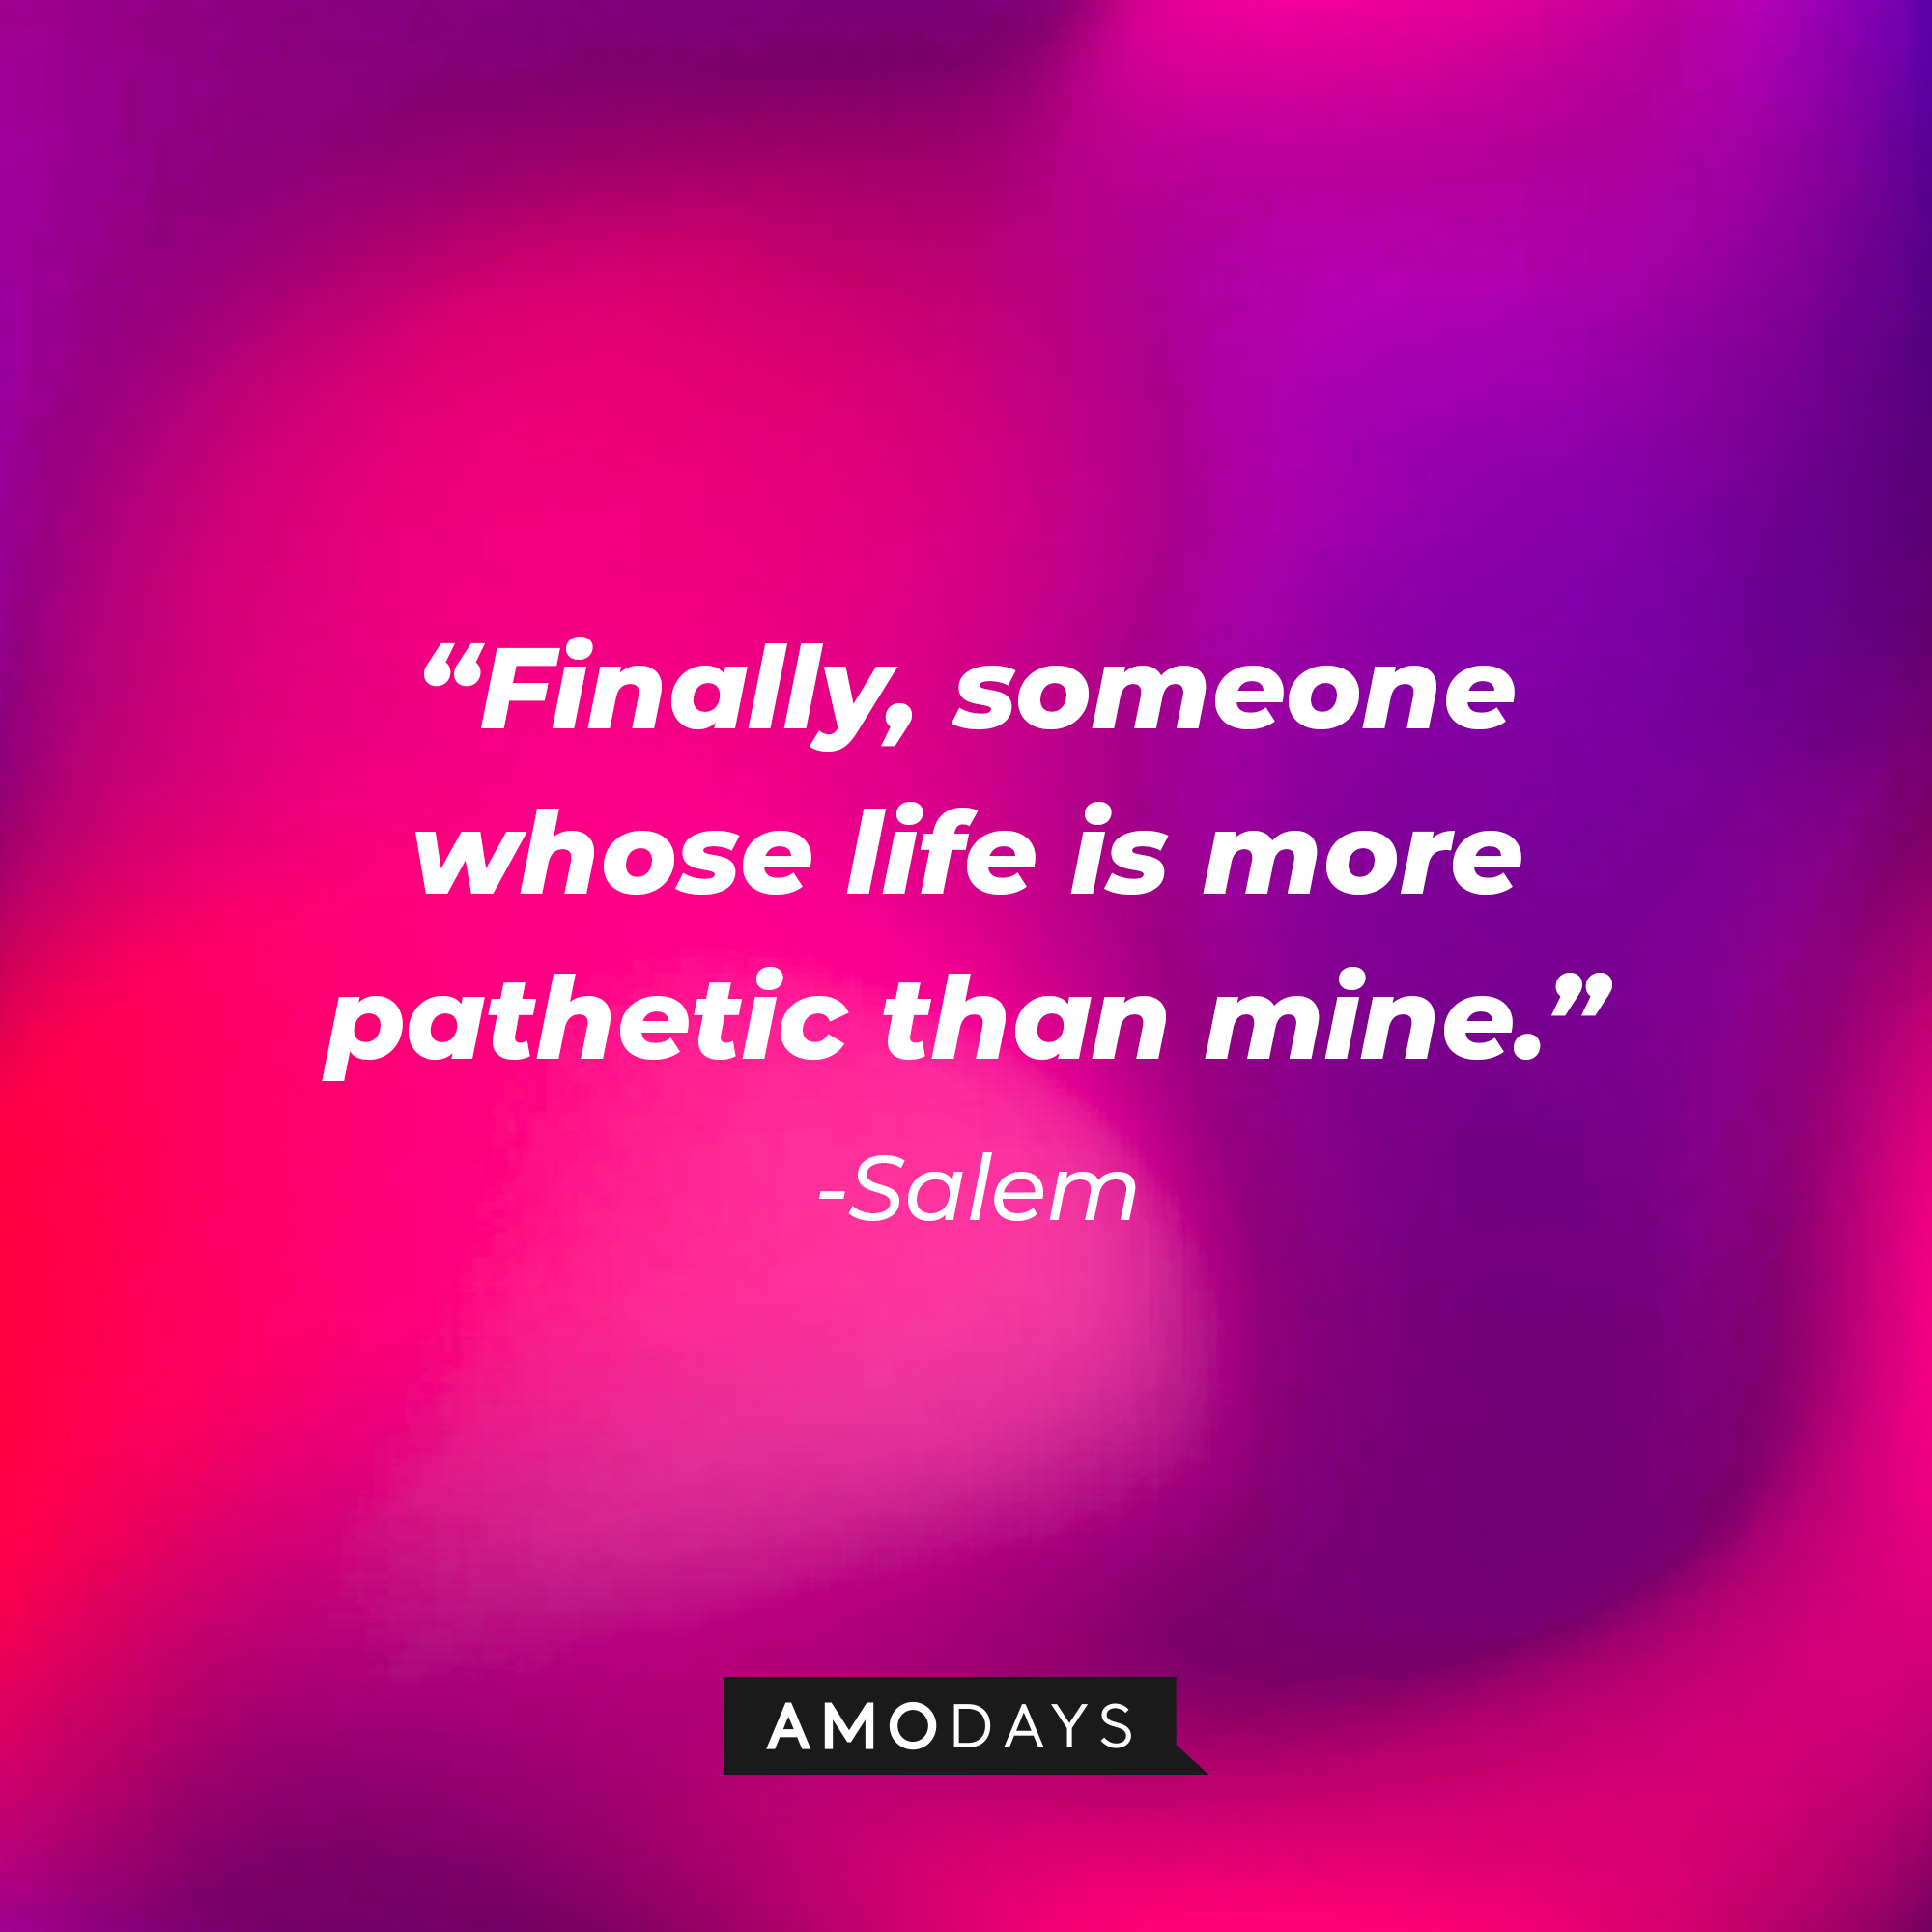 Salem’s quote: “Finally, someone whose life is more pathetic than mine.”  | Source: AmoDays